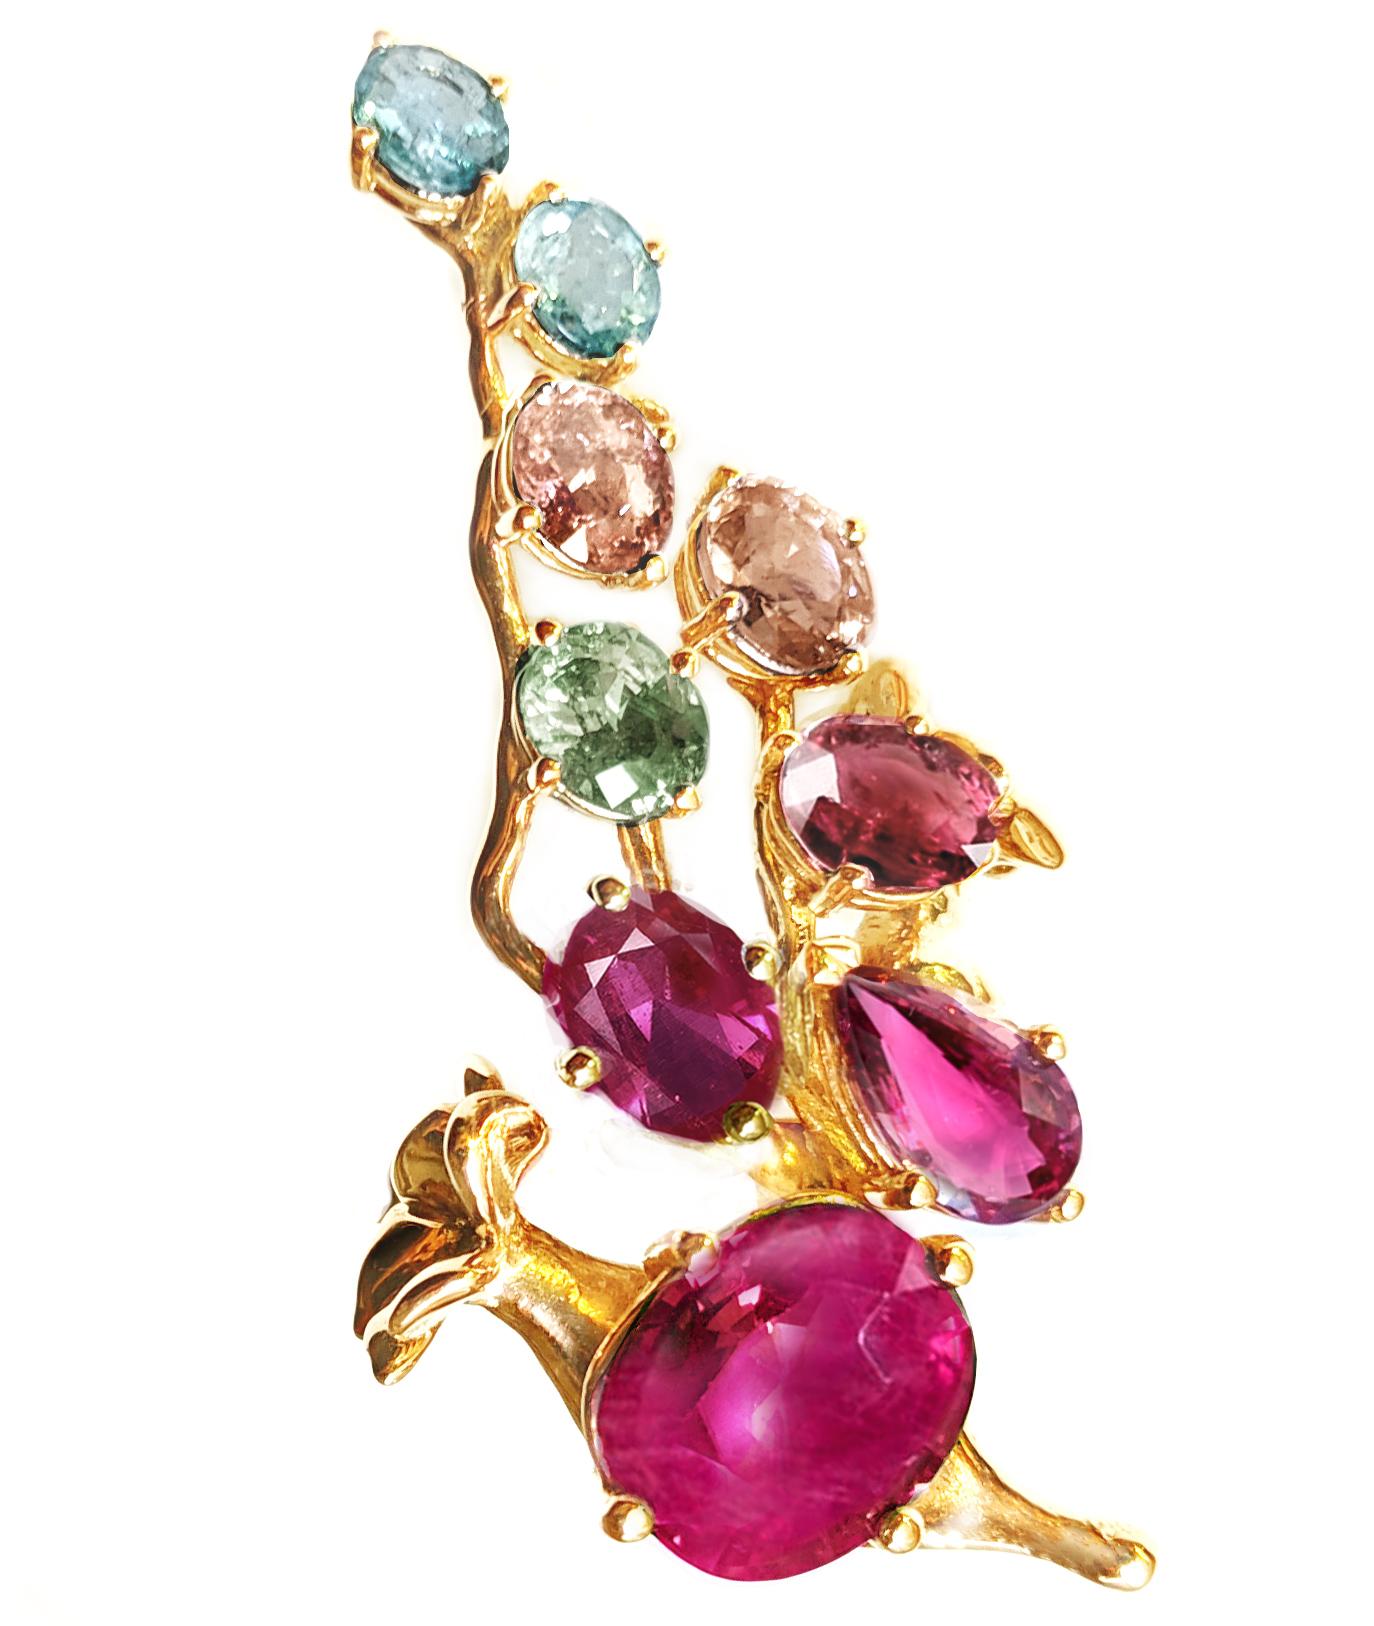 Eighteen Karat Gold Sapphires Pendant Necklace with Pink Rubies and Garnets In New Condition For Sale In Berlin, DE